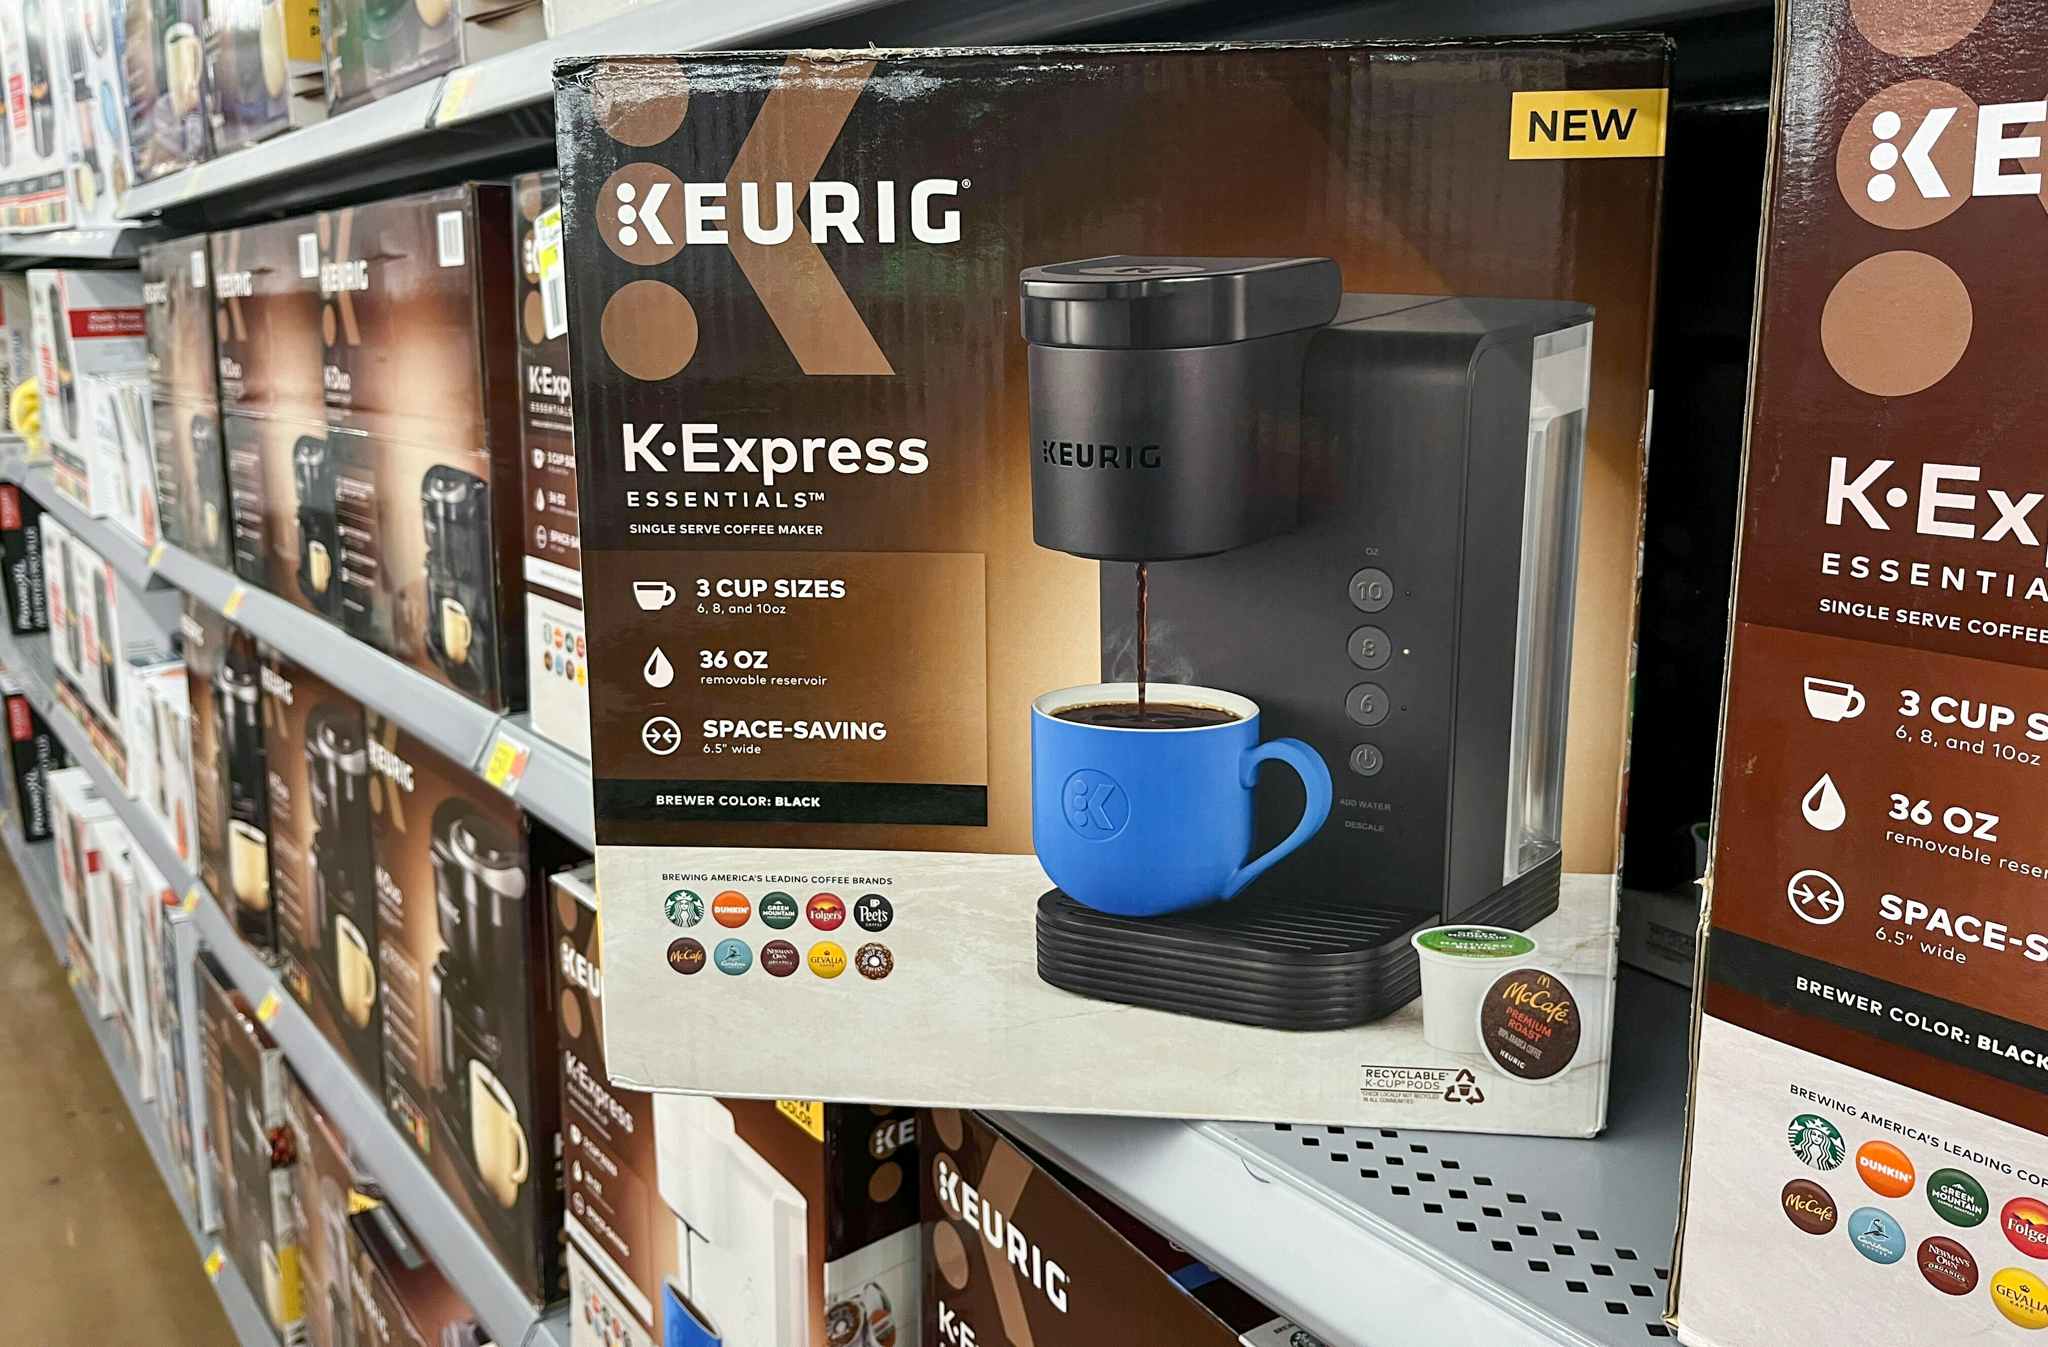 Keurig's K-Latte K-Cup brewer with frother drops below Black Friday pricing  at $57 (Reg. $90)